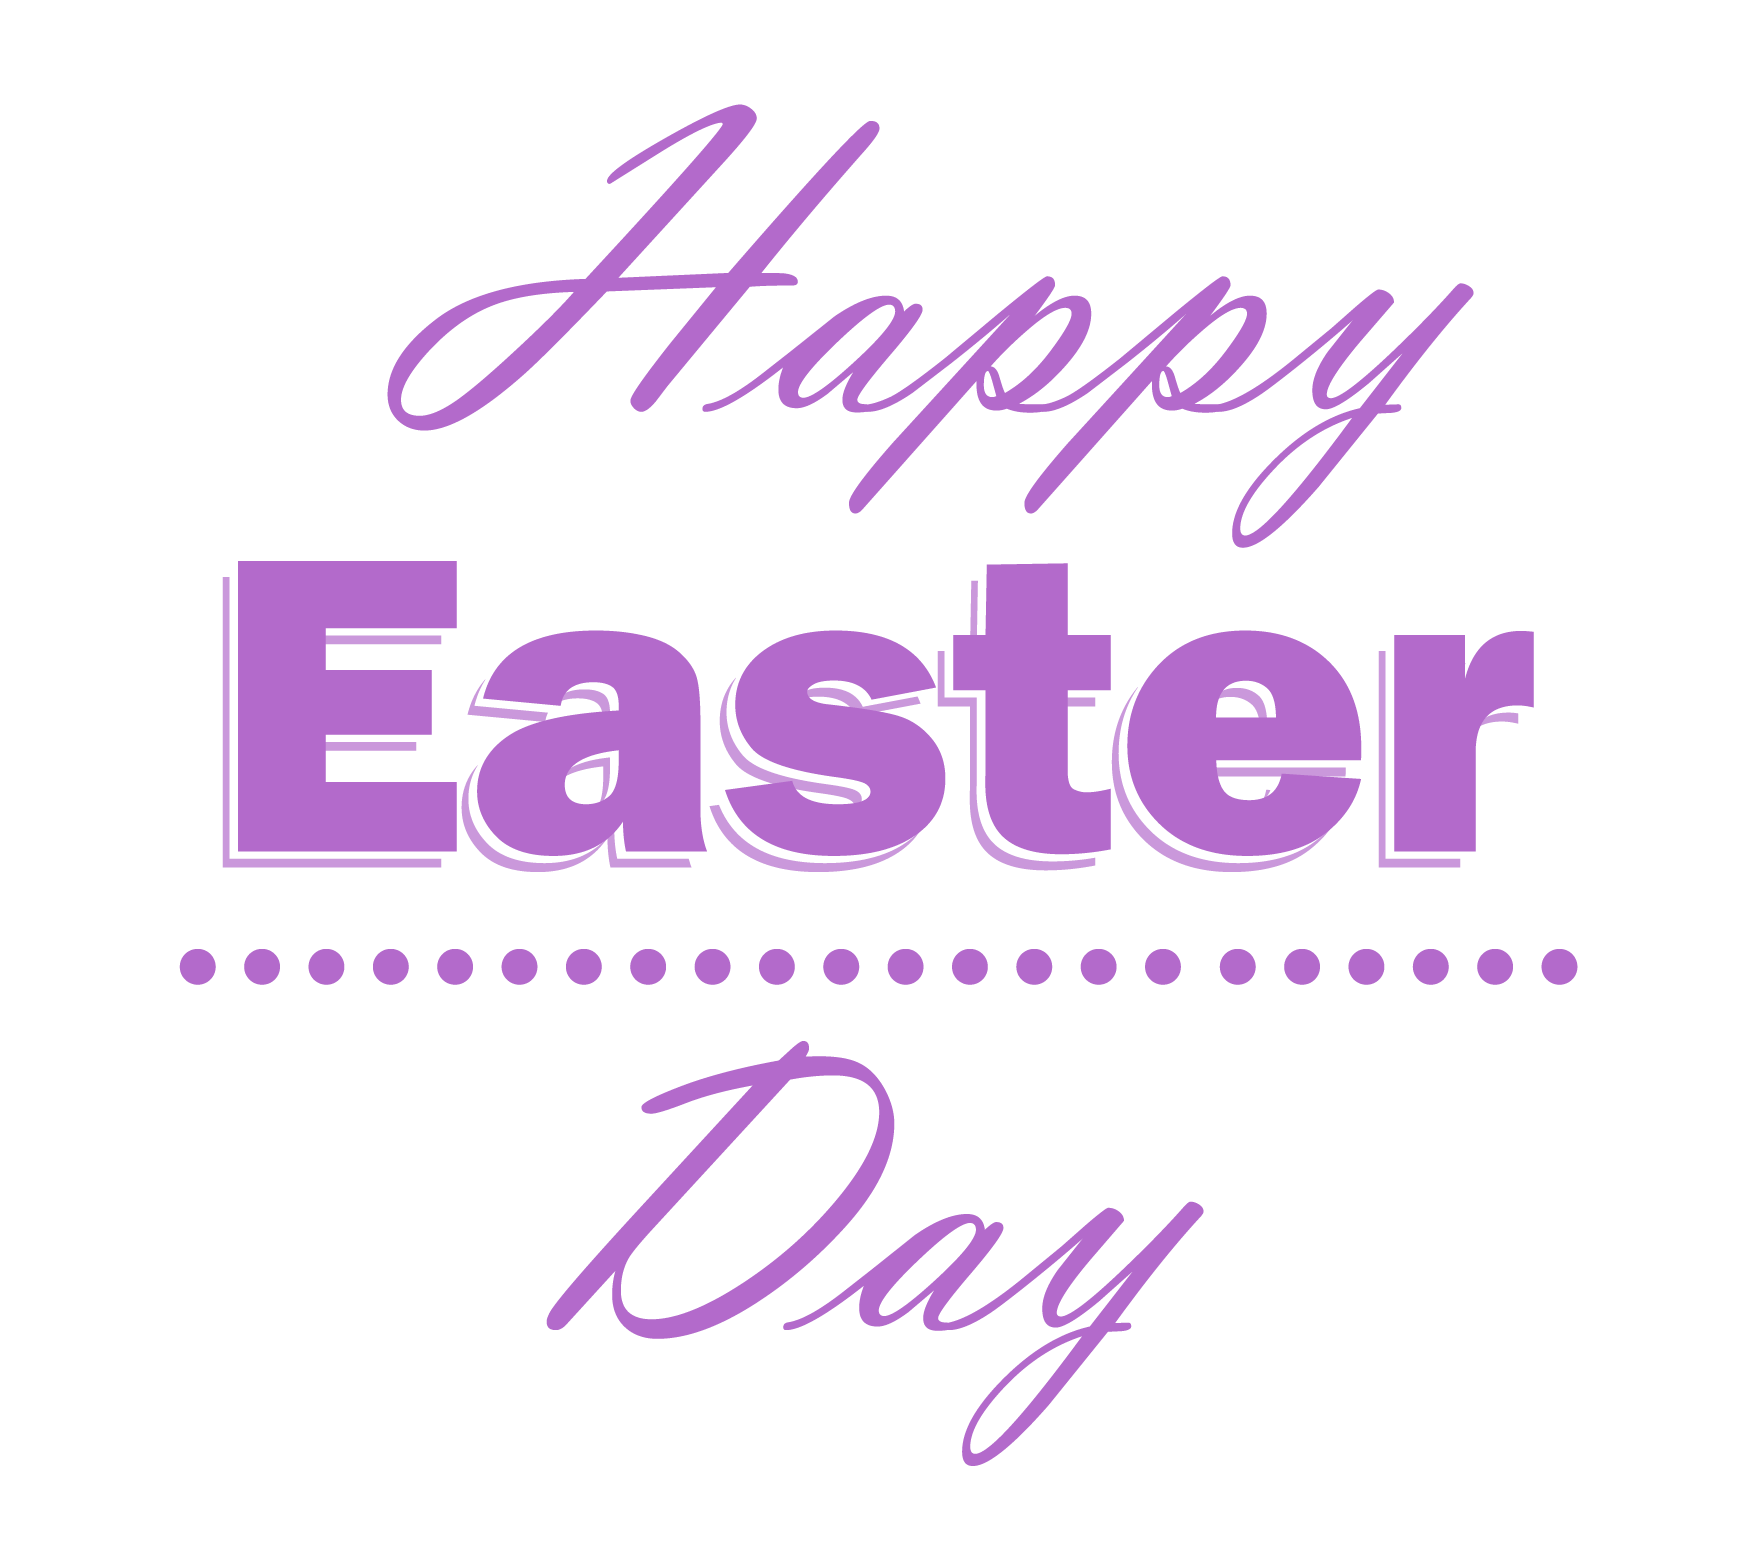 Happy Easter Day PNG Picture